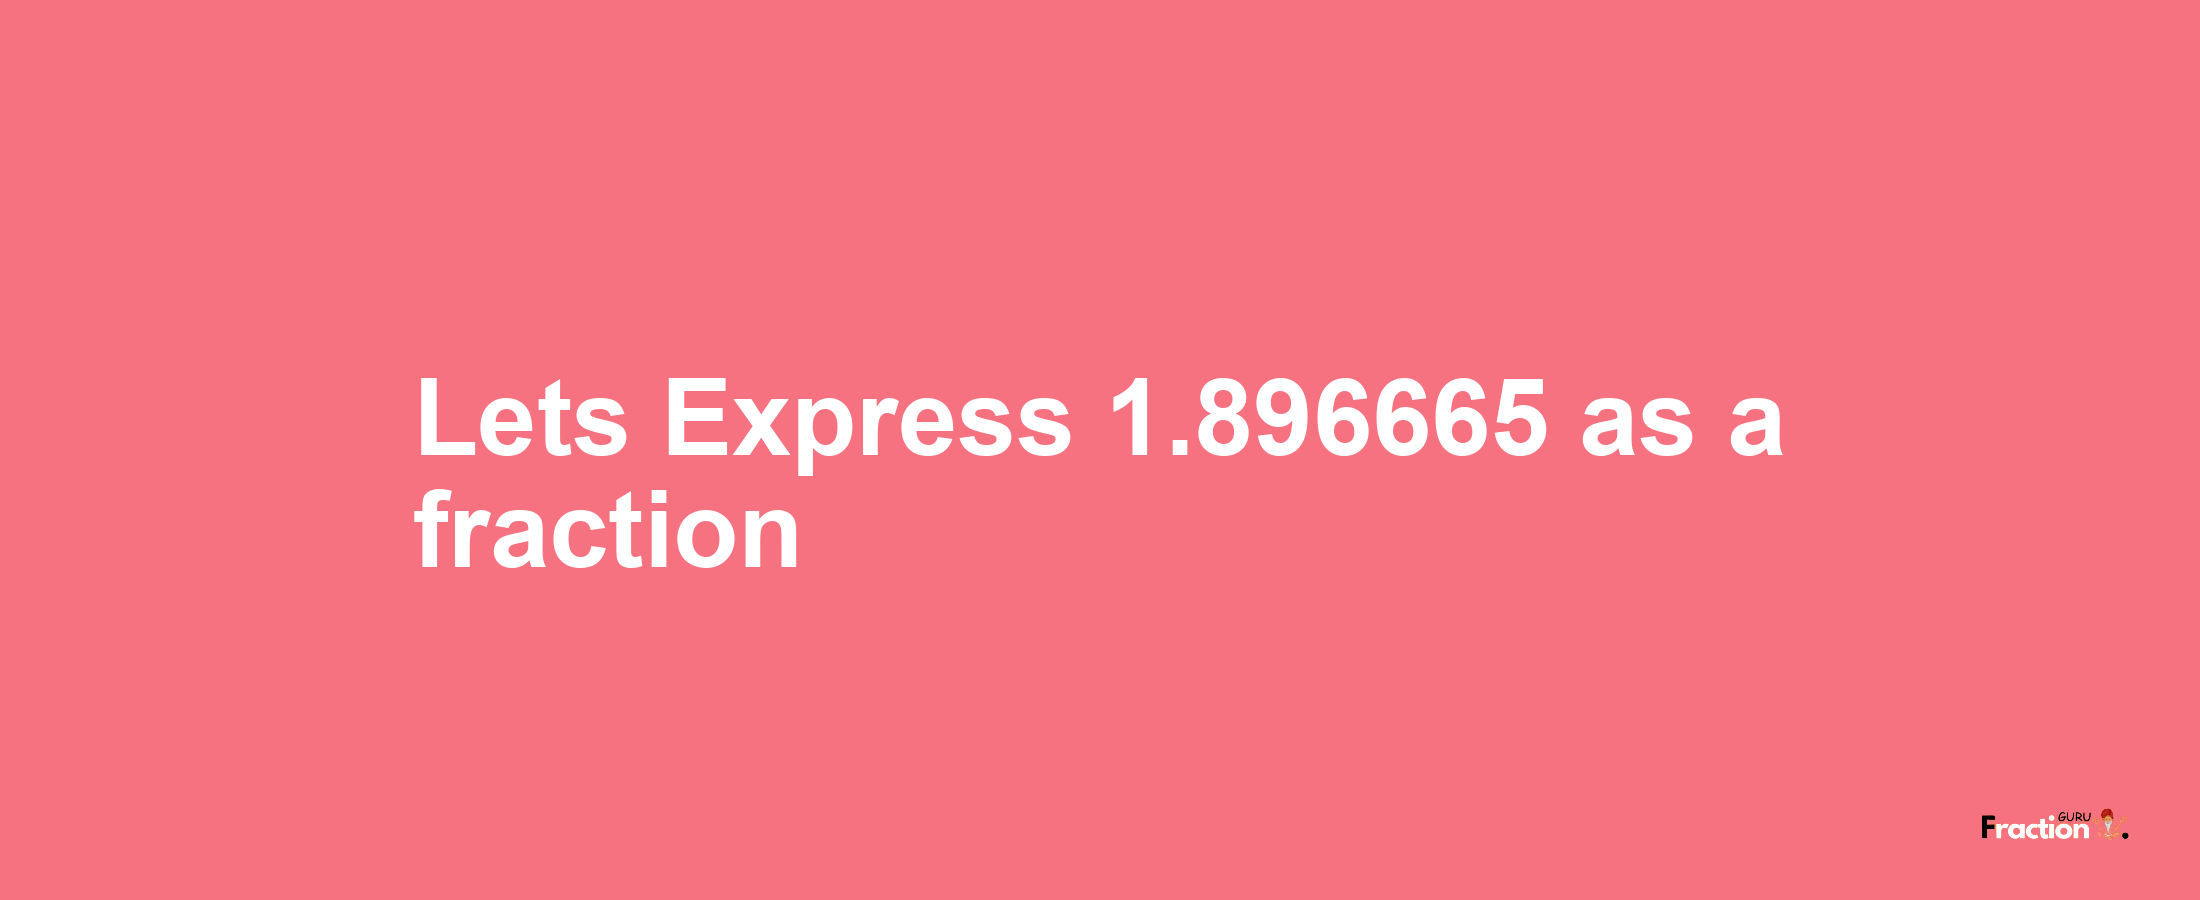 Lets Express 1.896665 as afraction